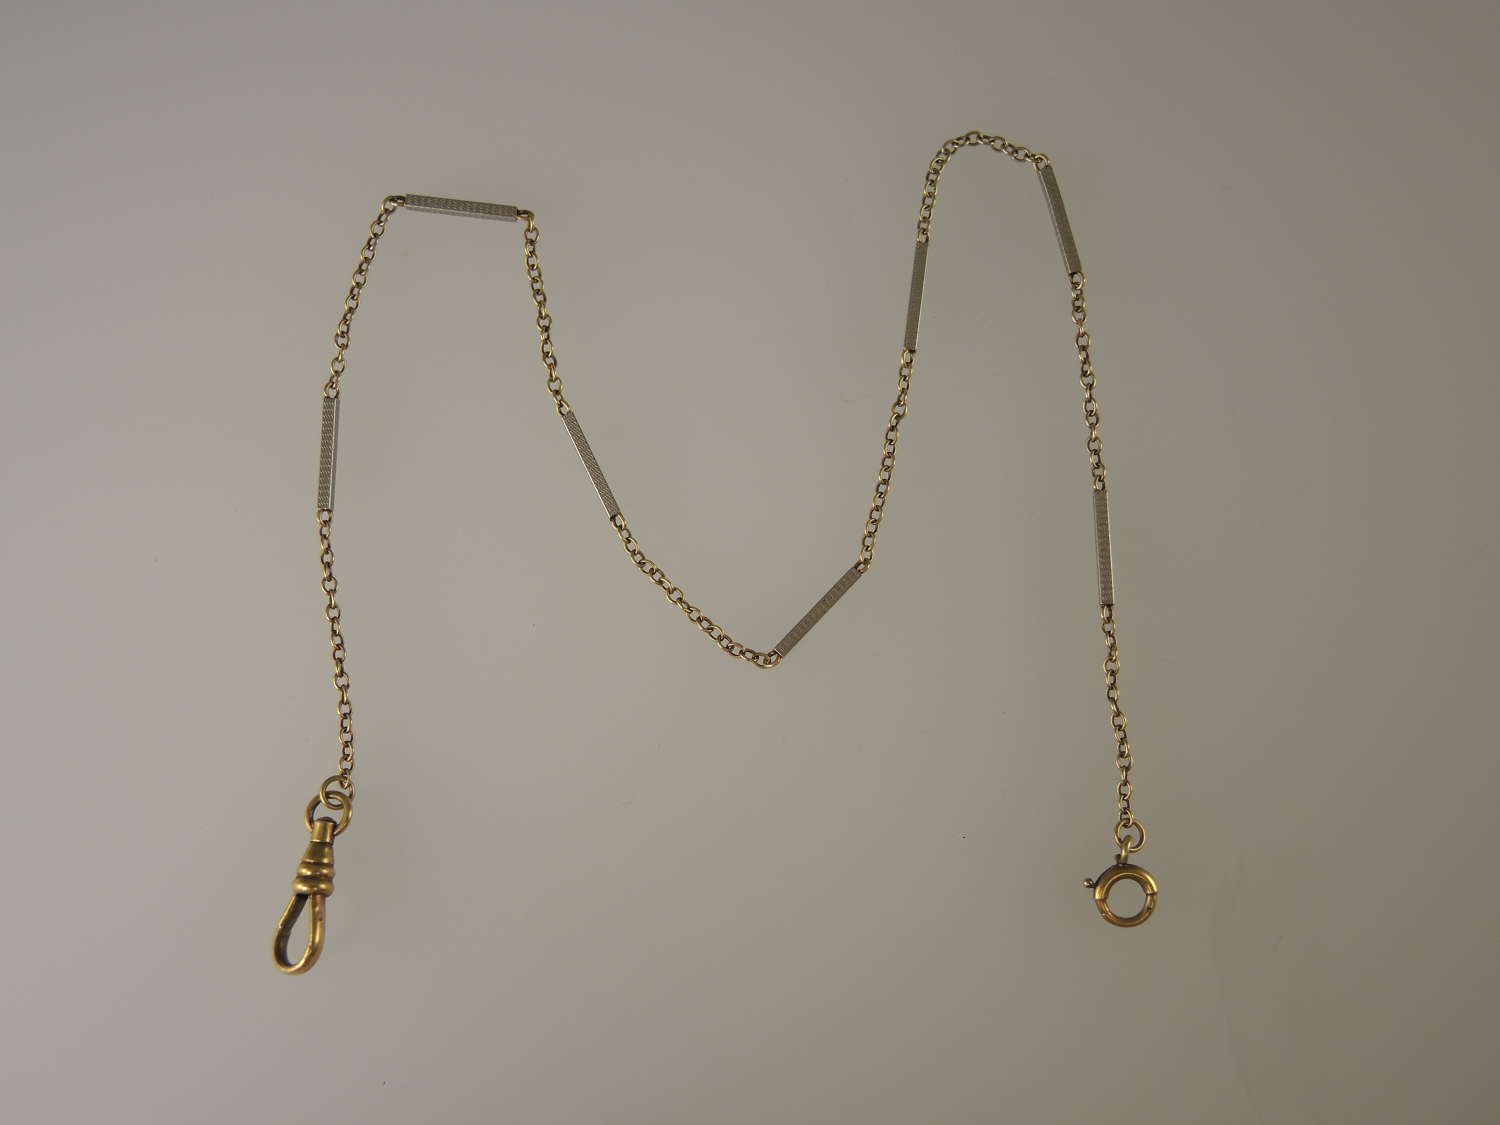 Solid 14K Gold TWO TONE Watch chain c1930